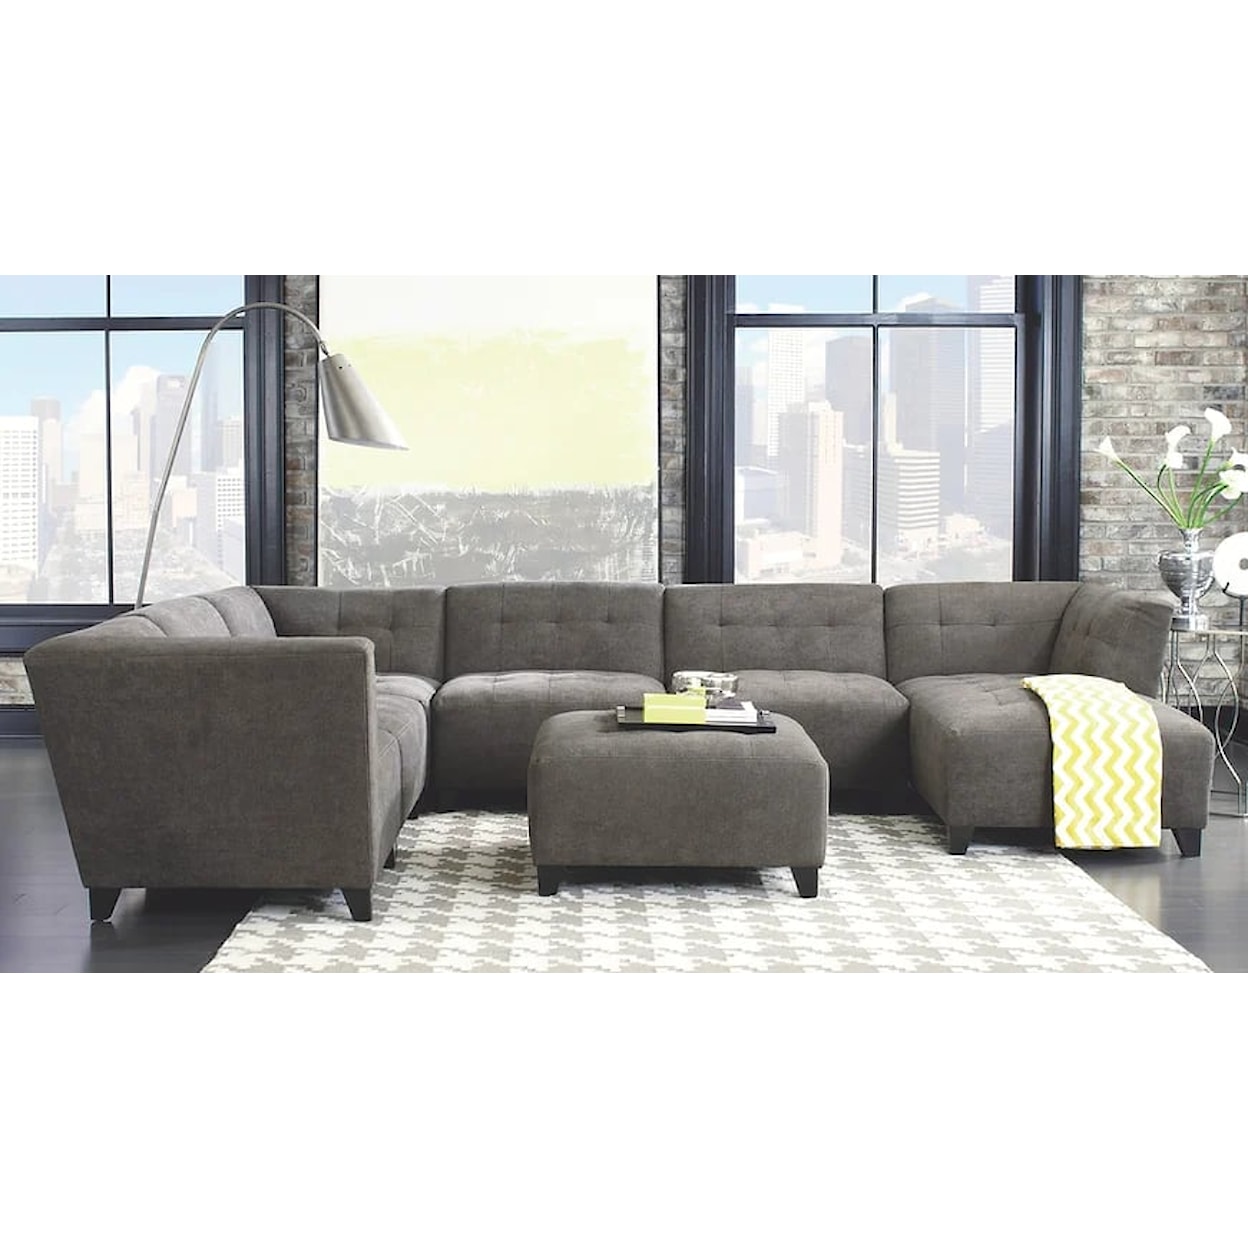 Jonathan Louis Belaire Belaire 5-peice Sectional